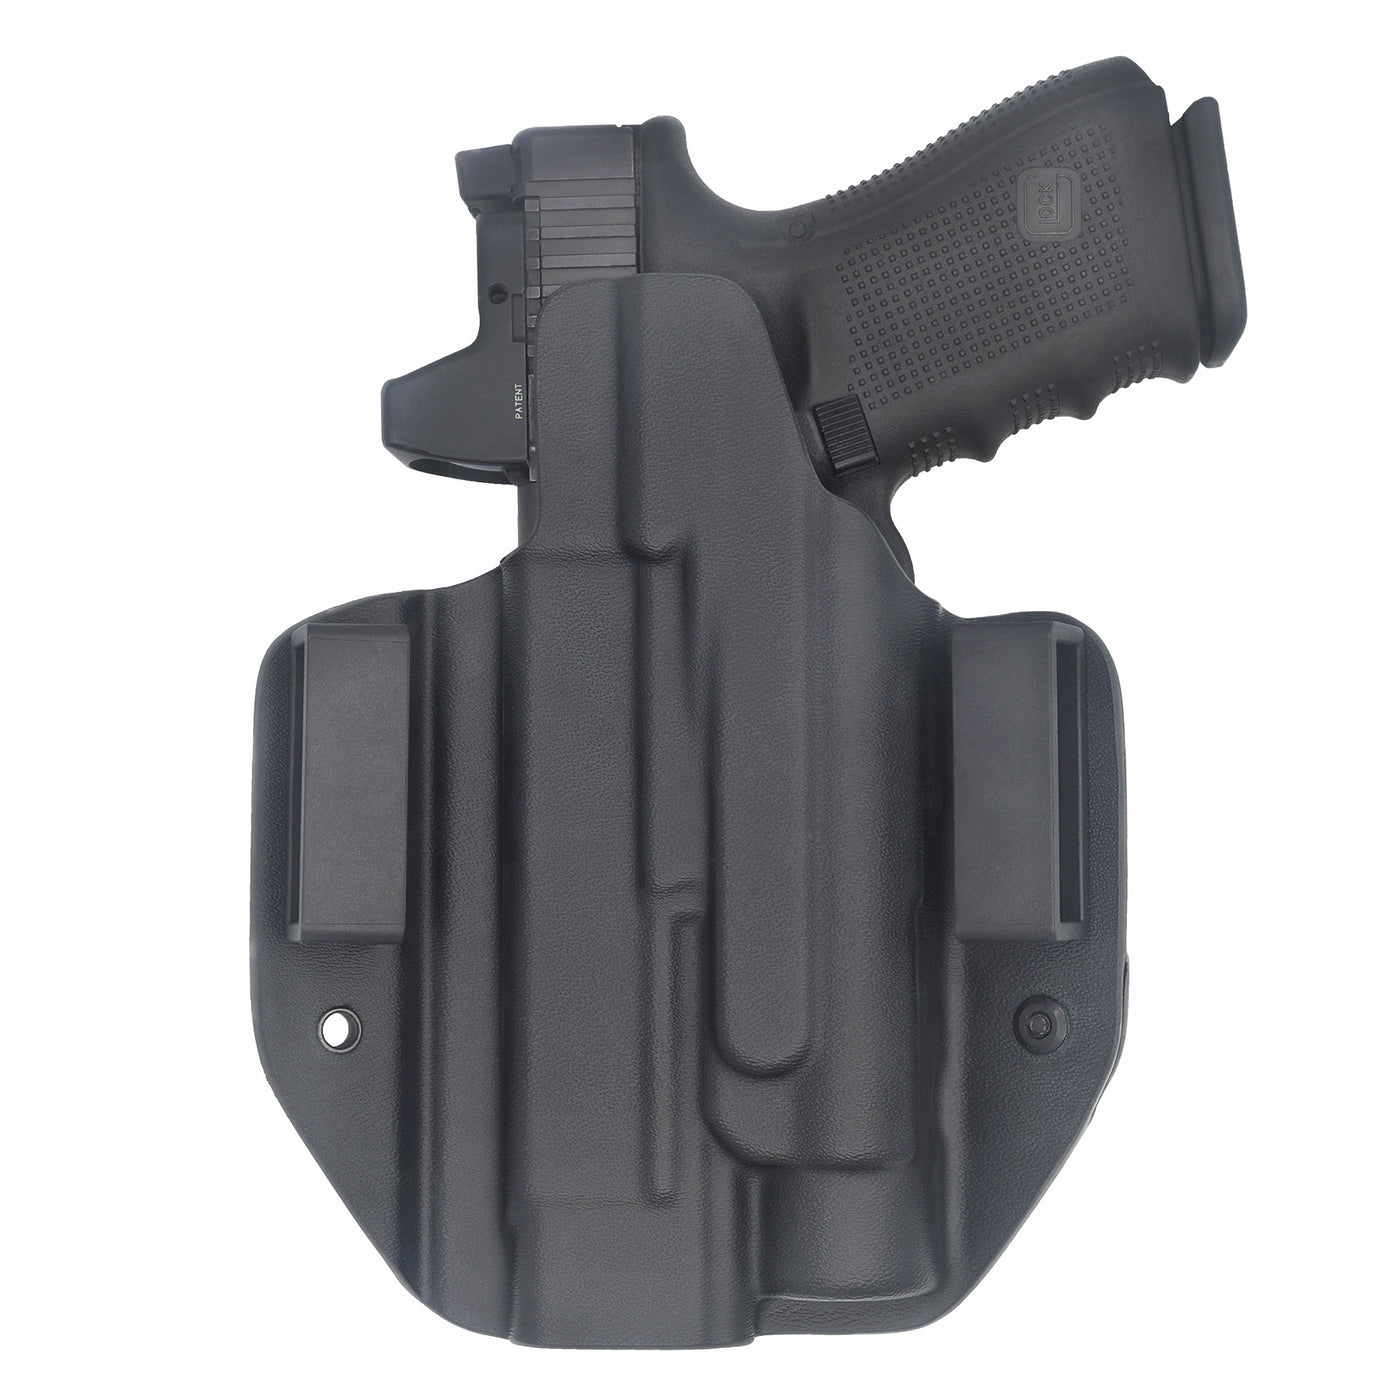 C&G Holsters Quickship OWB Tactical Poly80 Streamlight TLR1 in holstered position back view